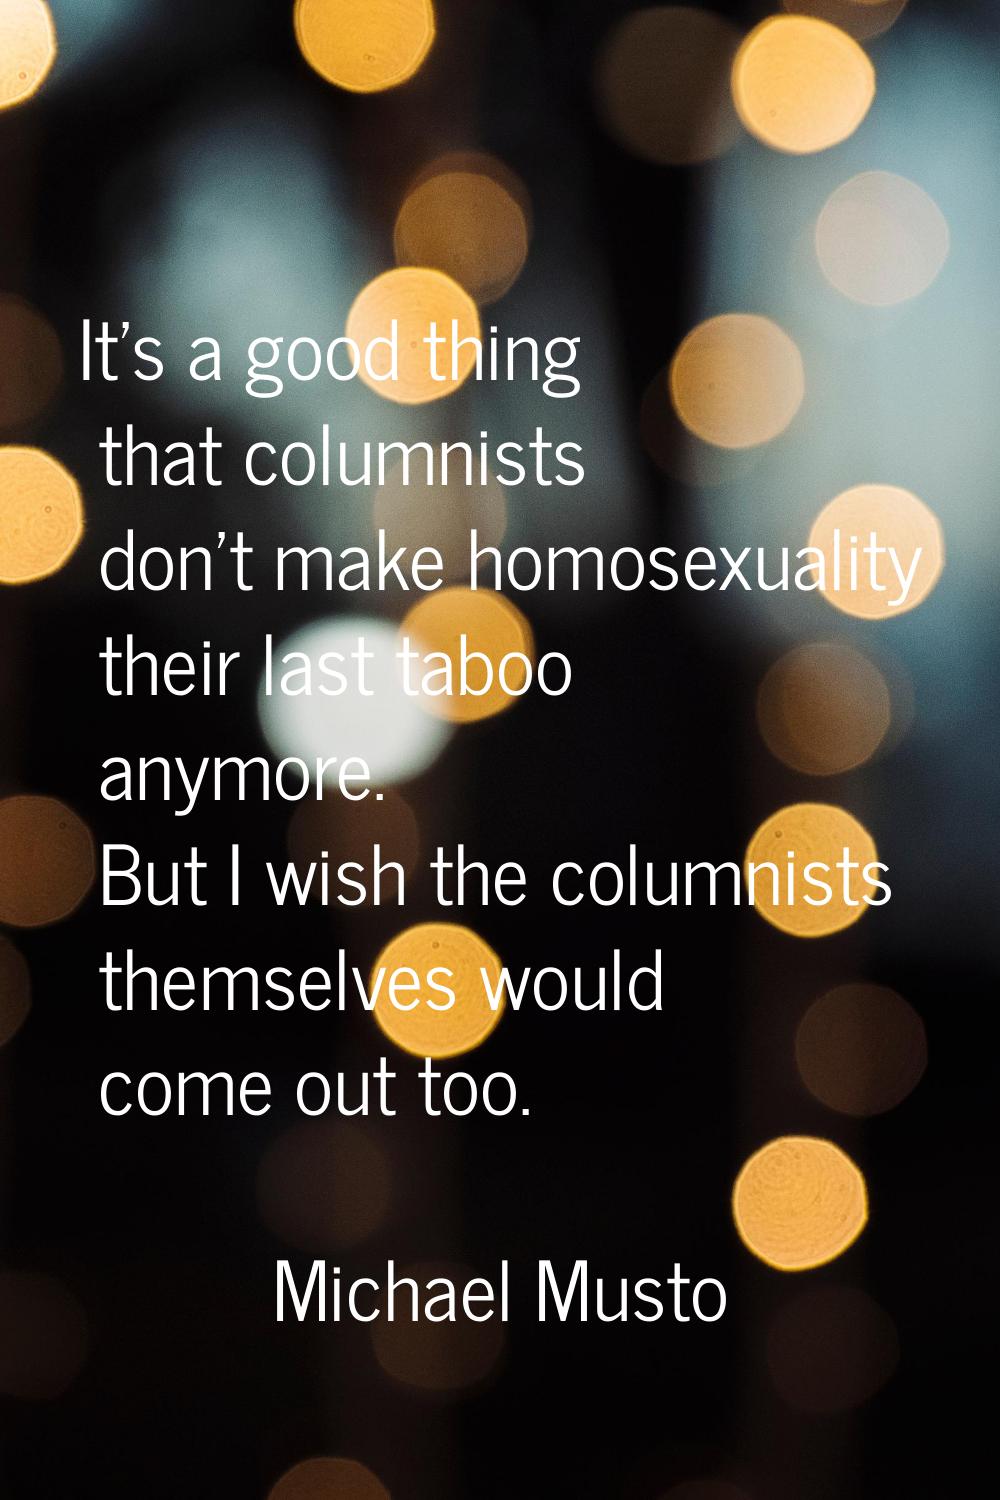 It's a good thing that columnists don't make homosexuality their last taboo anymore. But I wish the